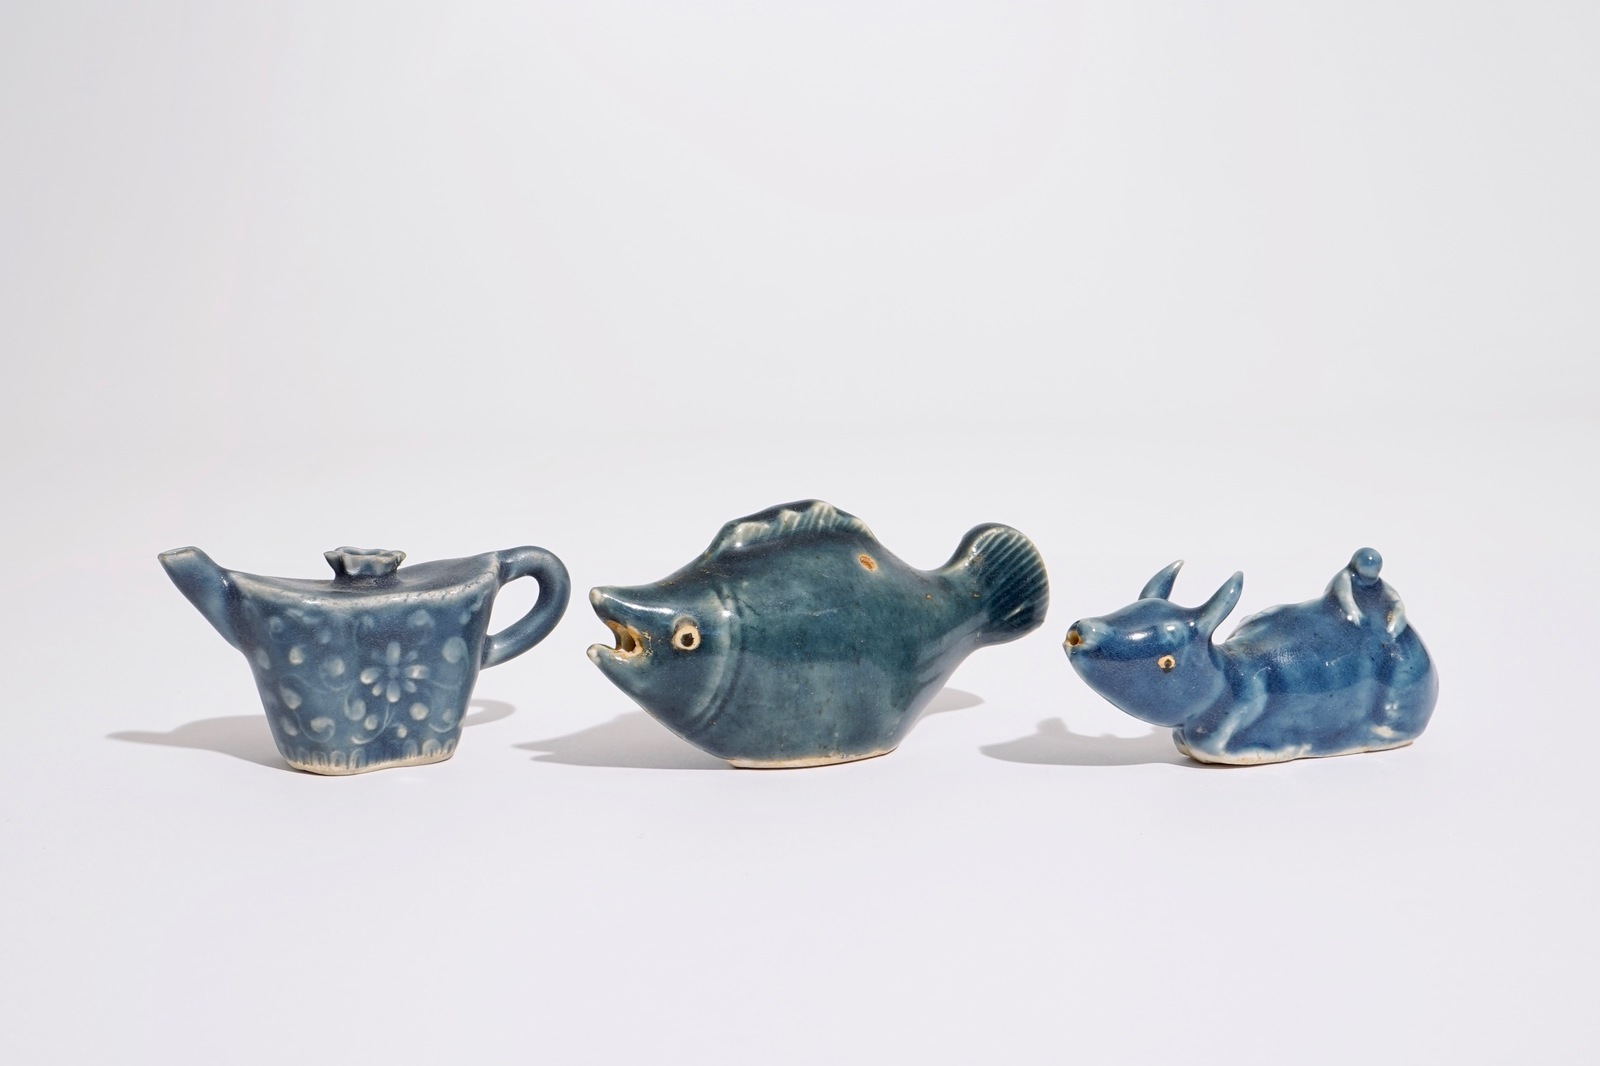 Three Chinese monochrome blue waterdroppers, 19/20th C. H.: 5 cm - L.: 10,5 cm - W.: 3,5 cm (the